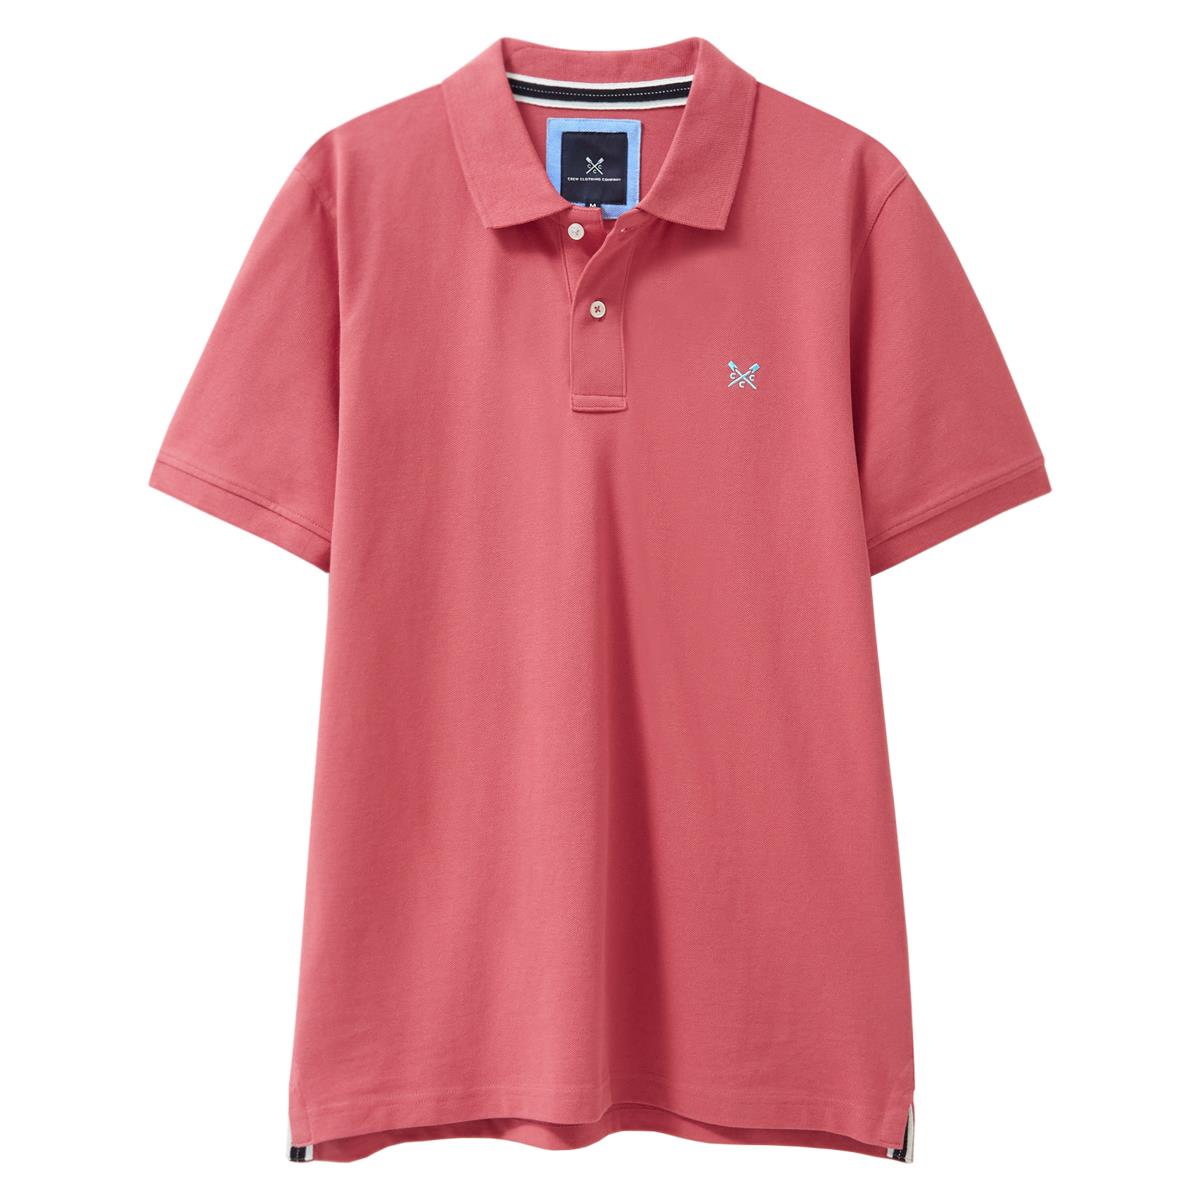 What are the specifications of Crew Clothing's pique polo shirts?